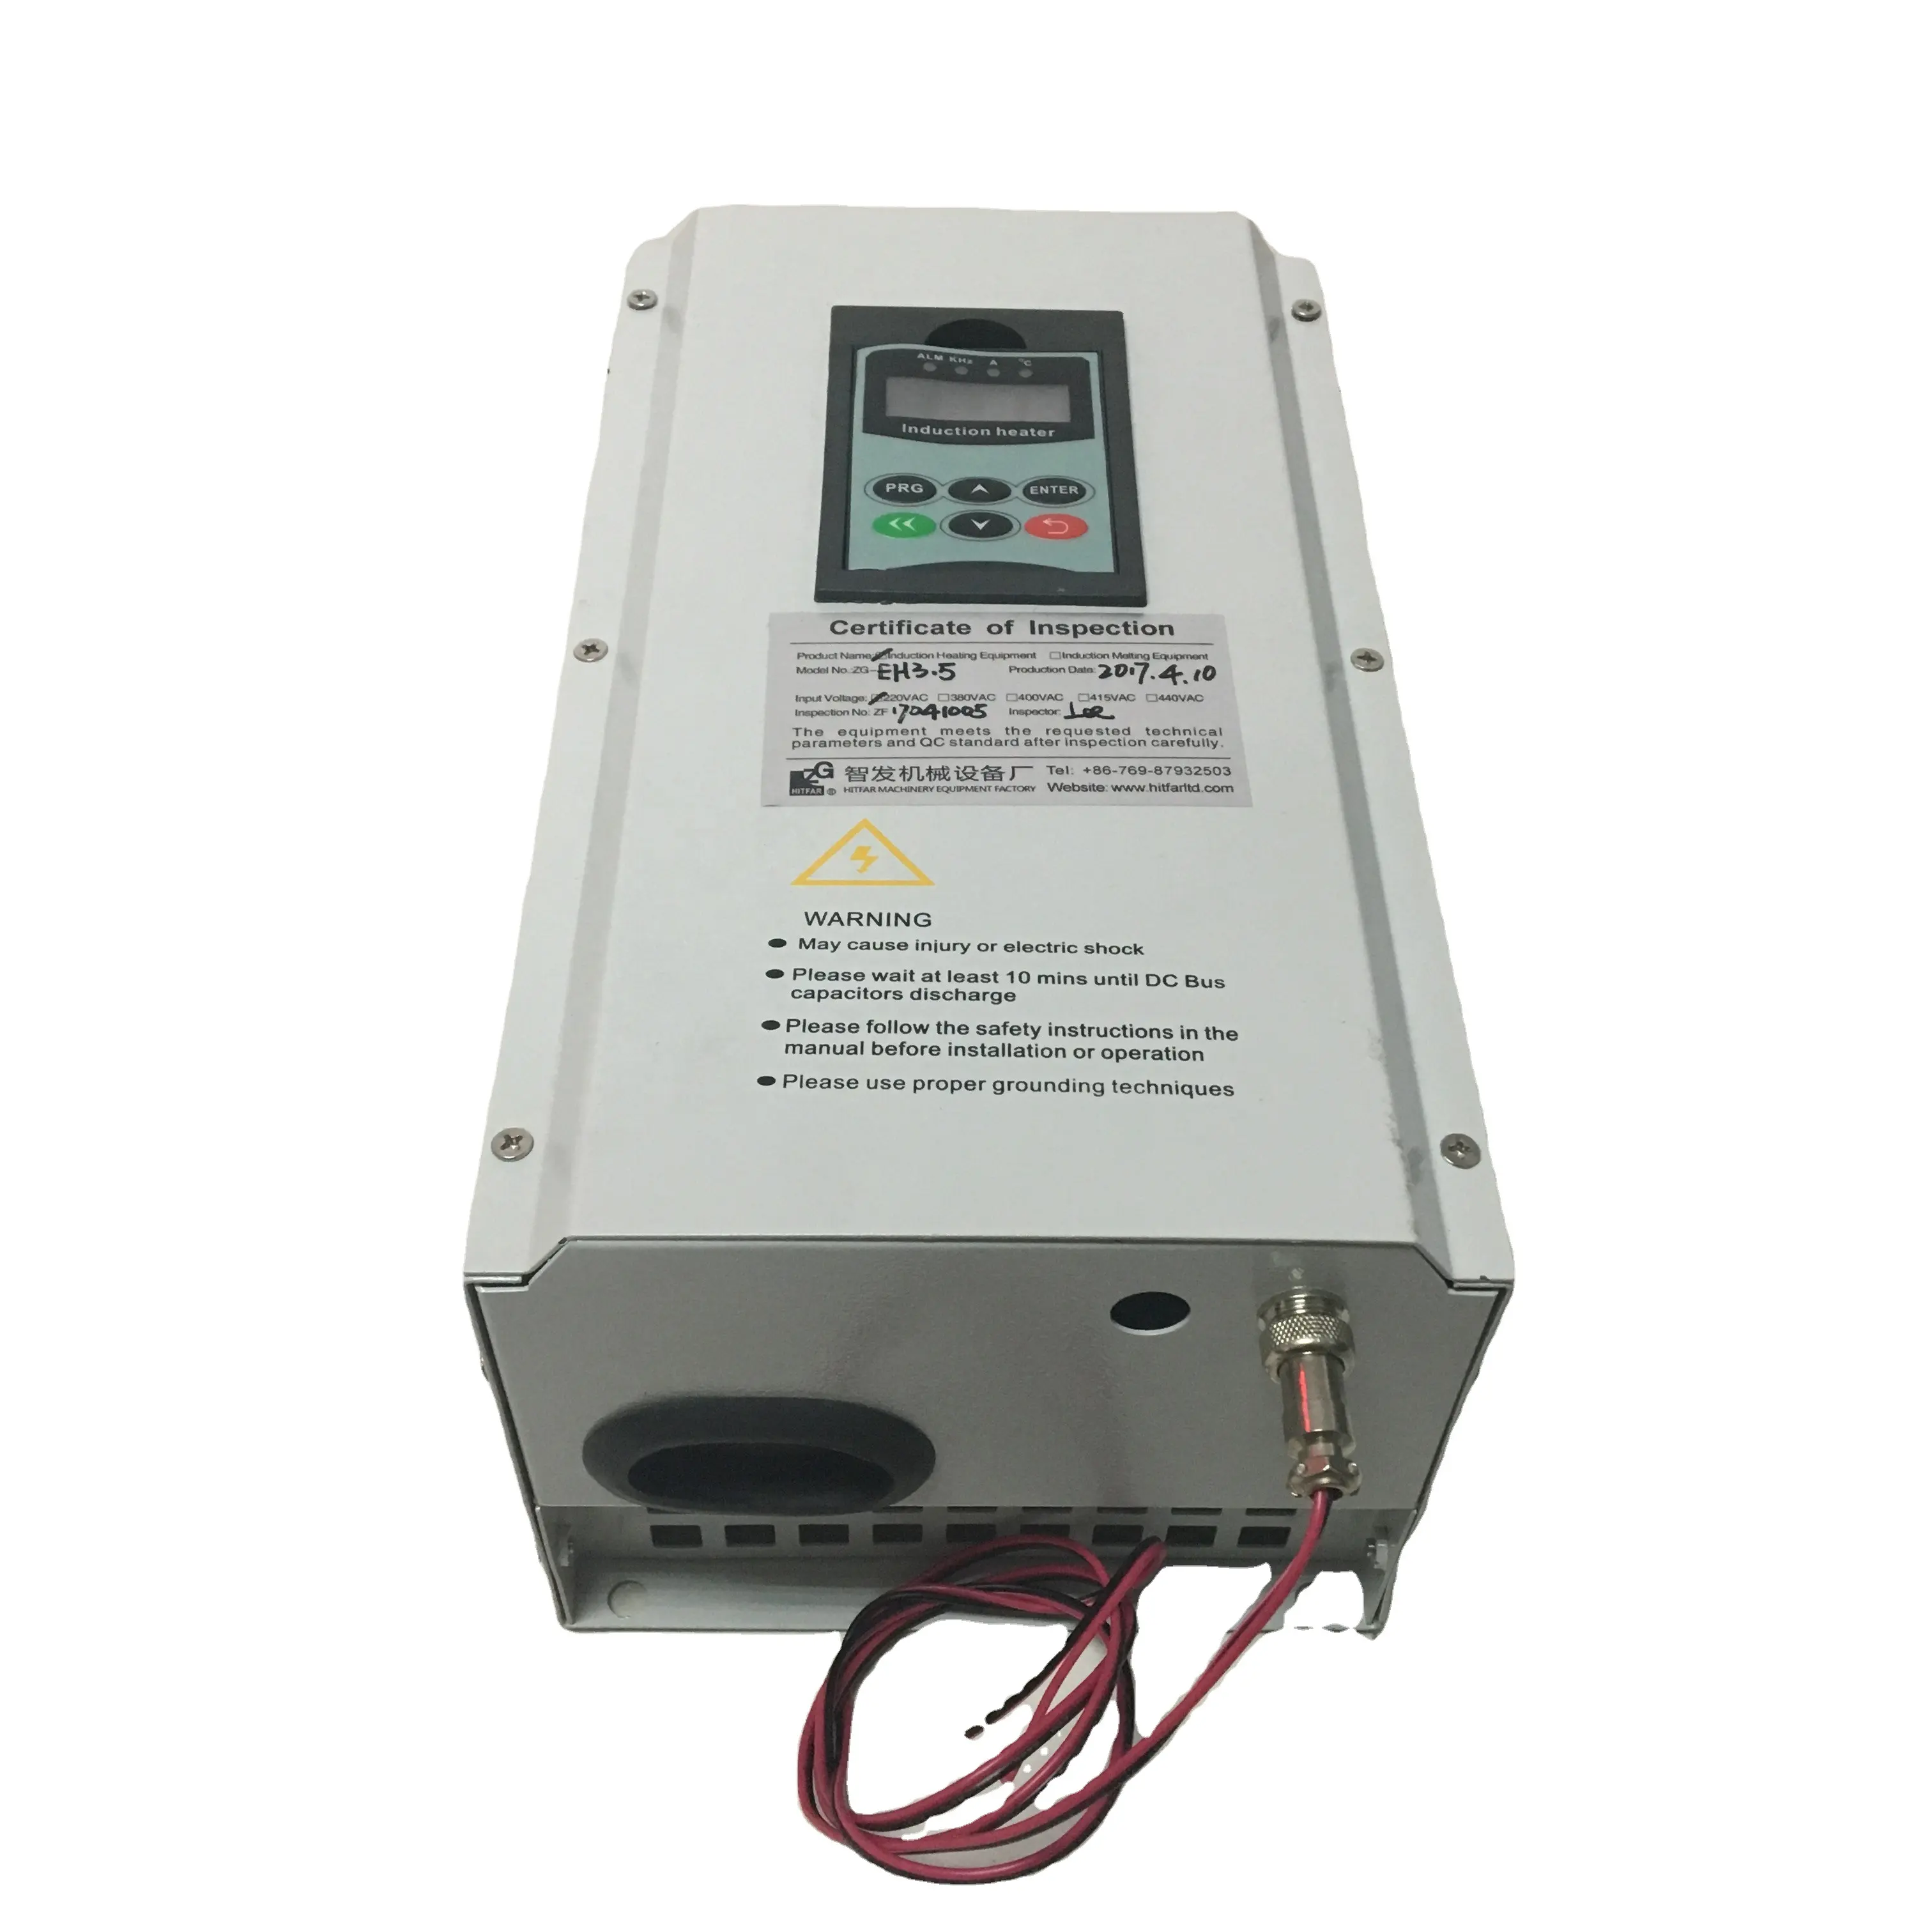 Hitfar Manufacturing Energy Saving at Least 30 percent 3.5 KW 220 V 1 P Electromagnetic Induction Heater